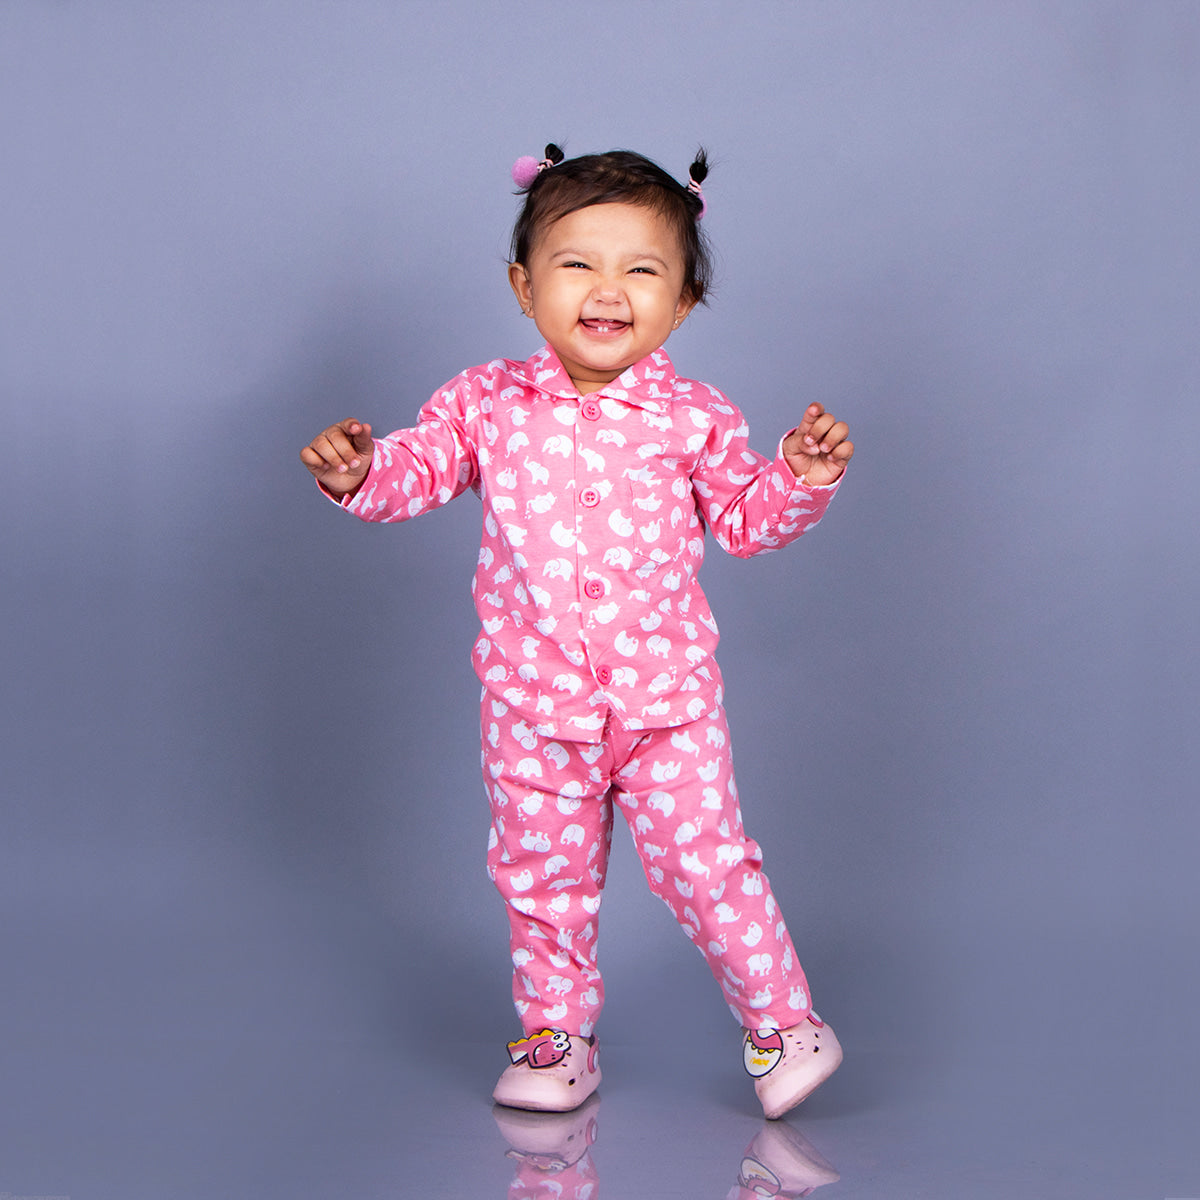 Full Sleeves Baby Elephant Printed Pajamas / Night Suit  for Baby/Kids - Pink